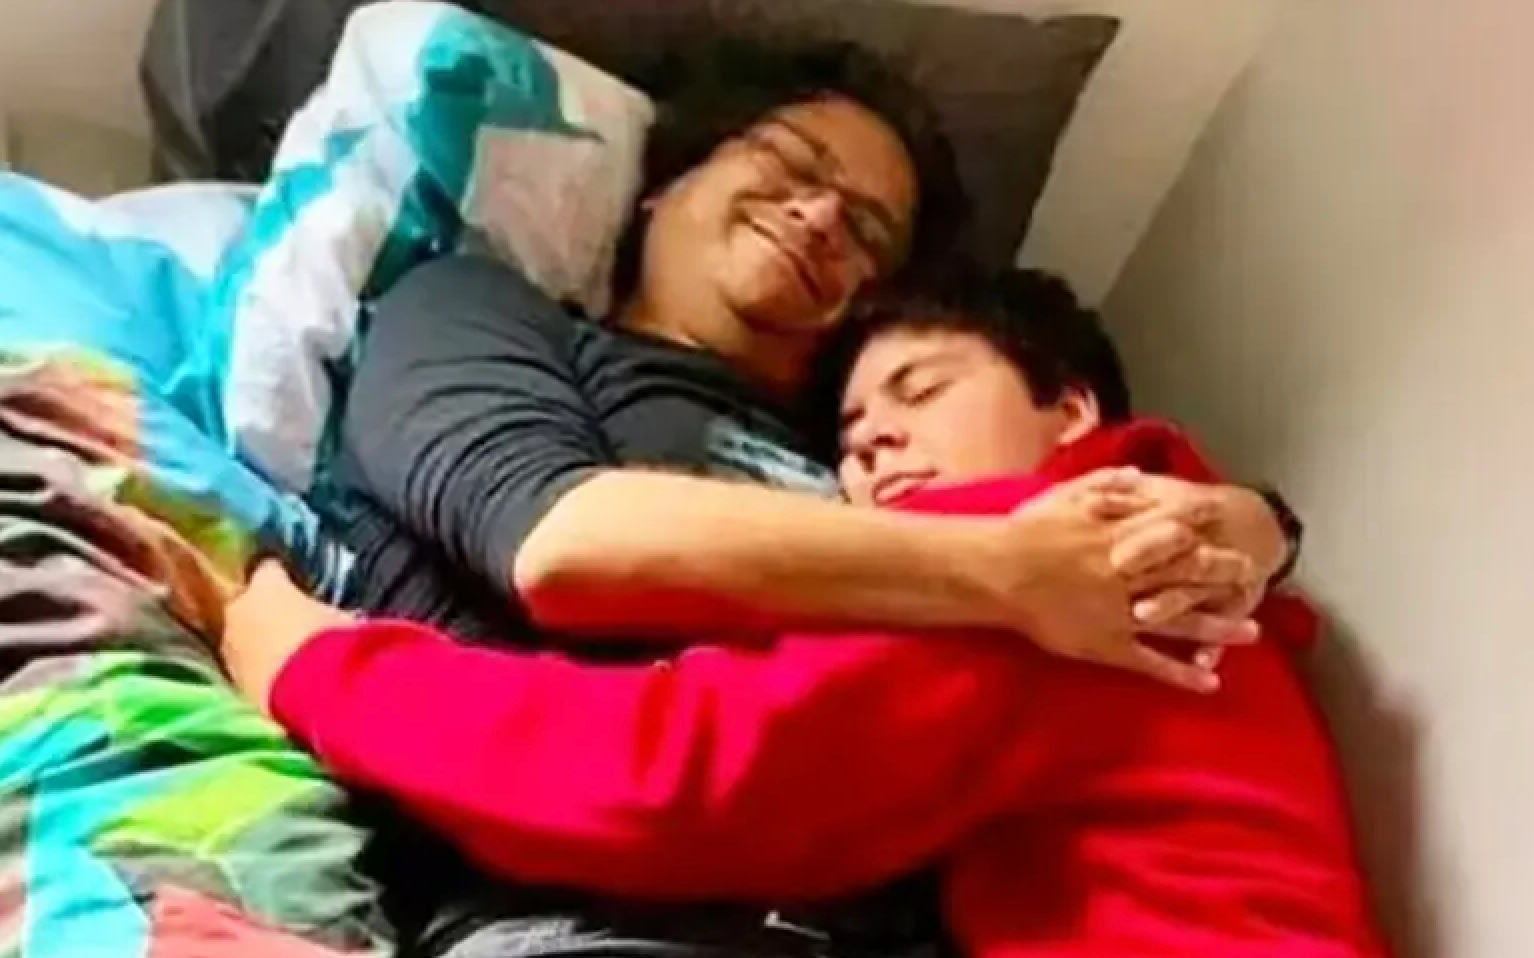 Shahzada Dawood, 48, and 19-year-old son Suleman share a tender hug before their doomed deep sea trip on the Titan submersible